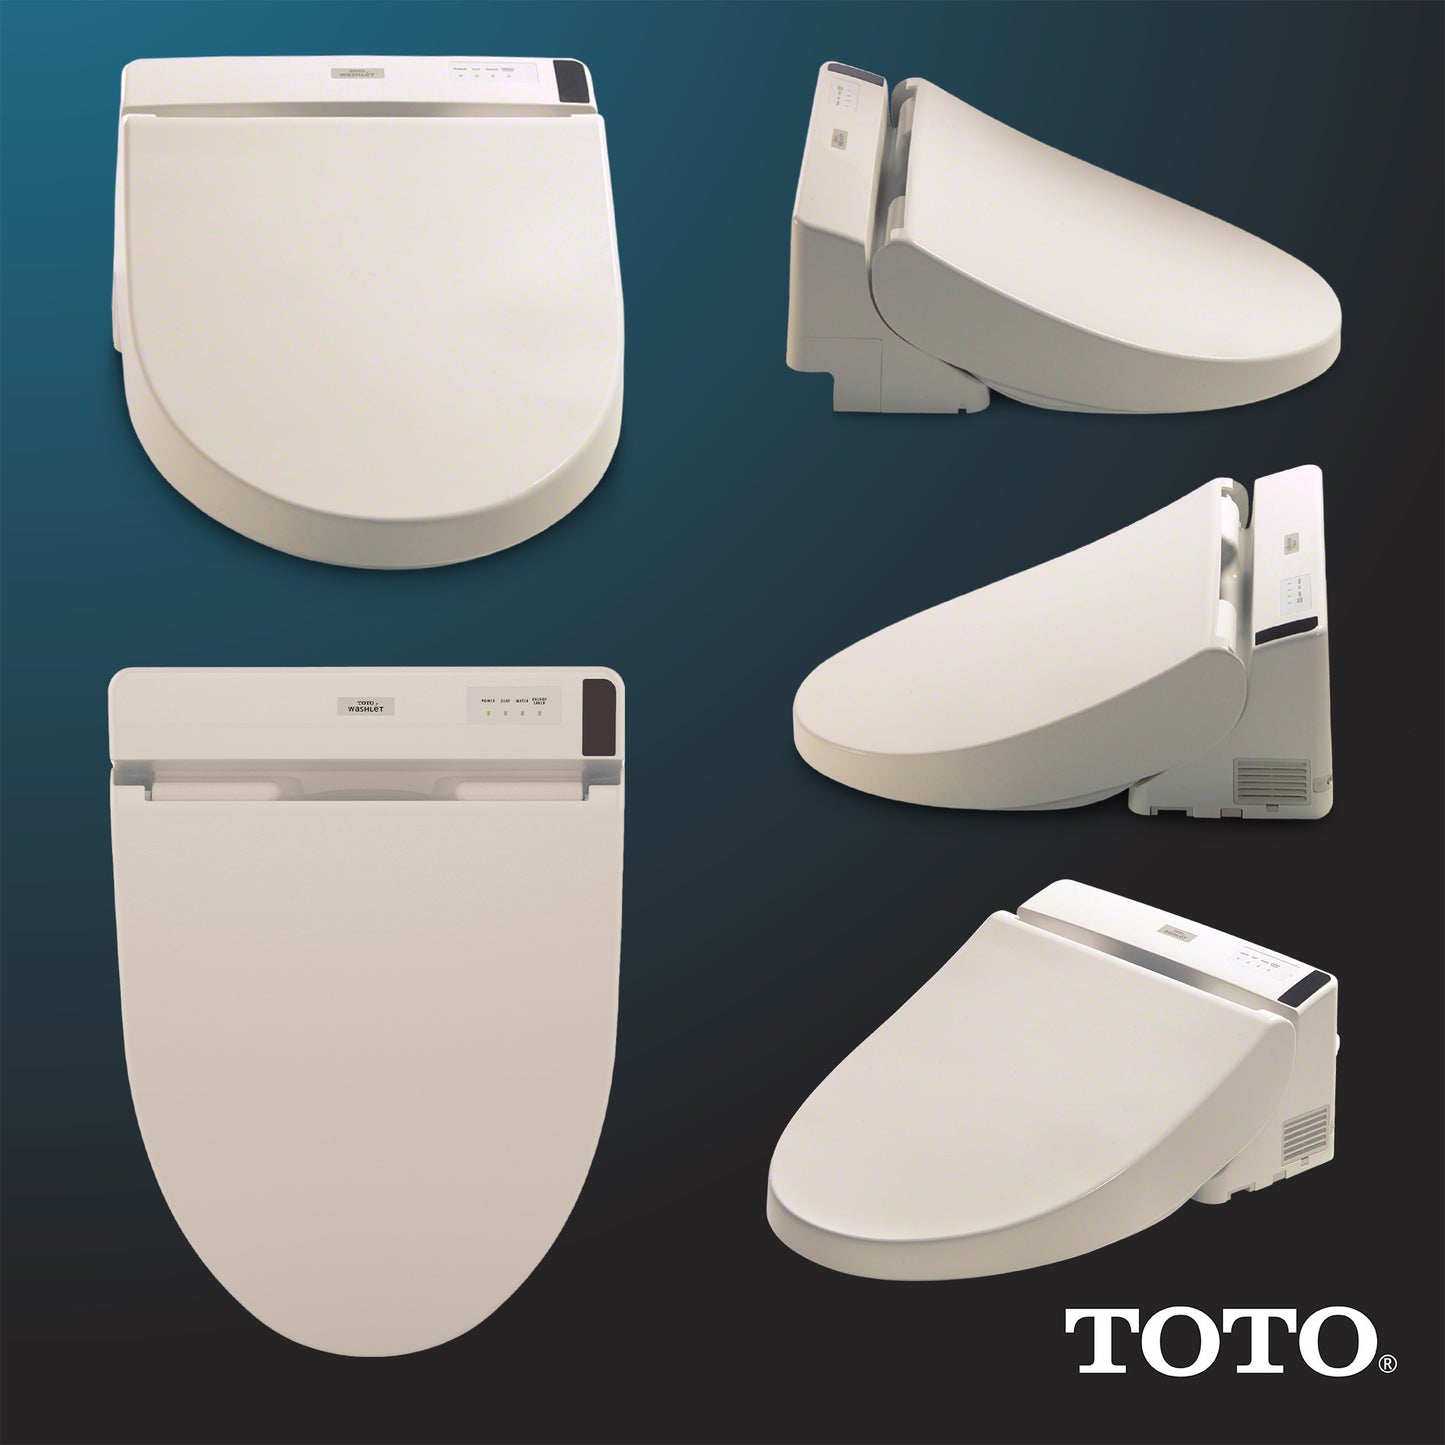 Toto SW2043R#12 - Washlet C200 Bidet Seat with Remote and Dual Action Spray - Sedona Beige